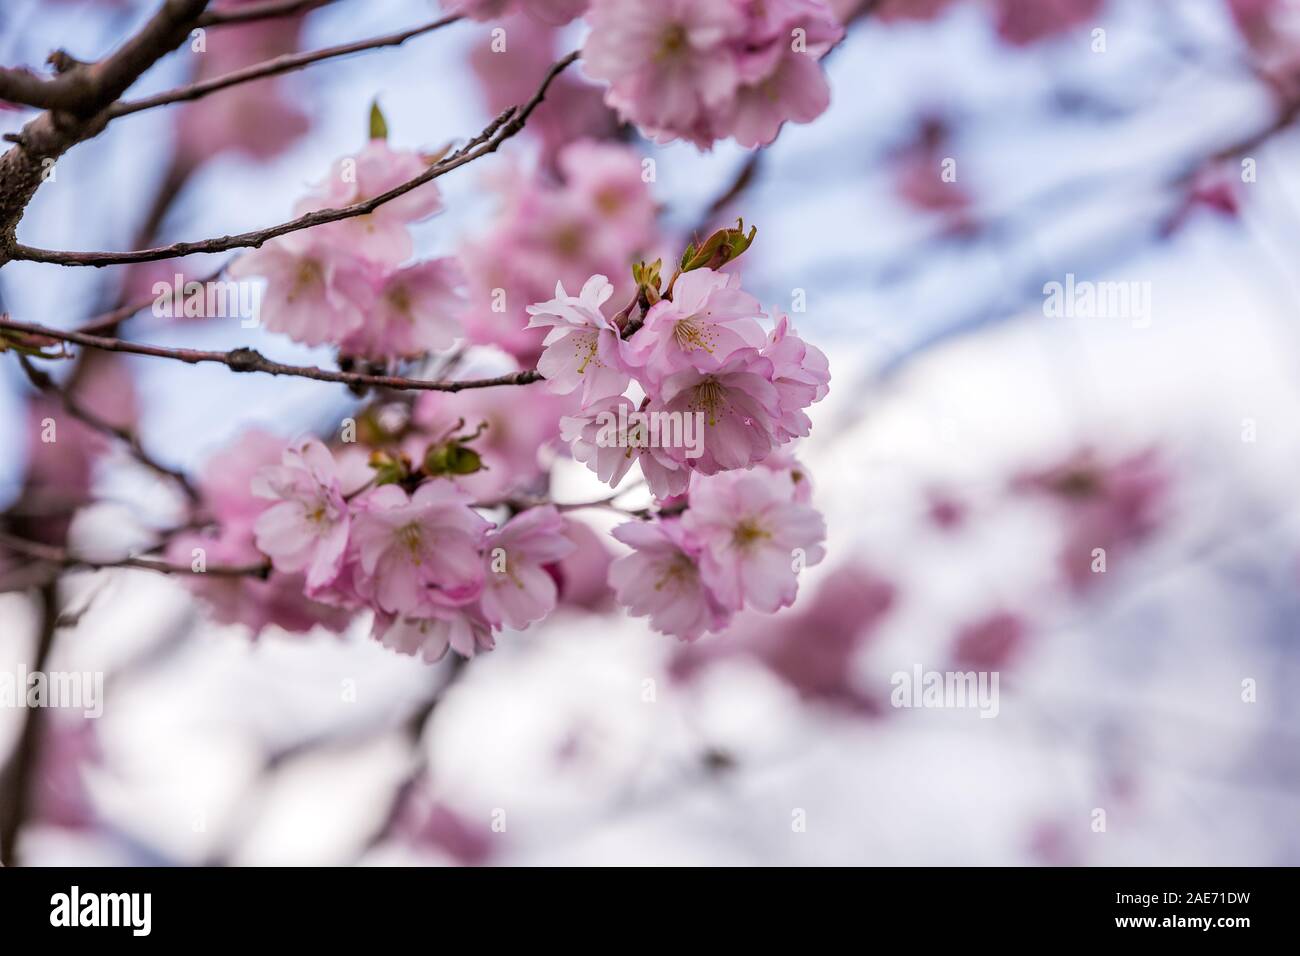 Blooming of cherry tree with a view of the snow-capped mountains in the spring on a clear day at Sochi, Russia. Stock Photo